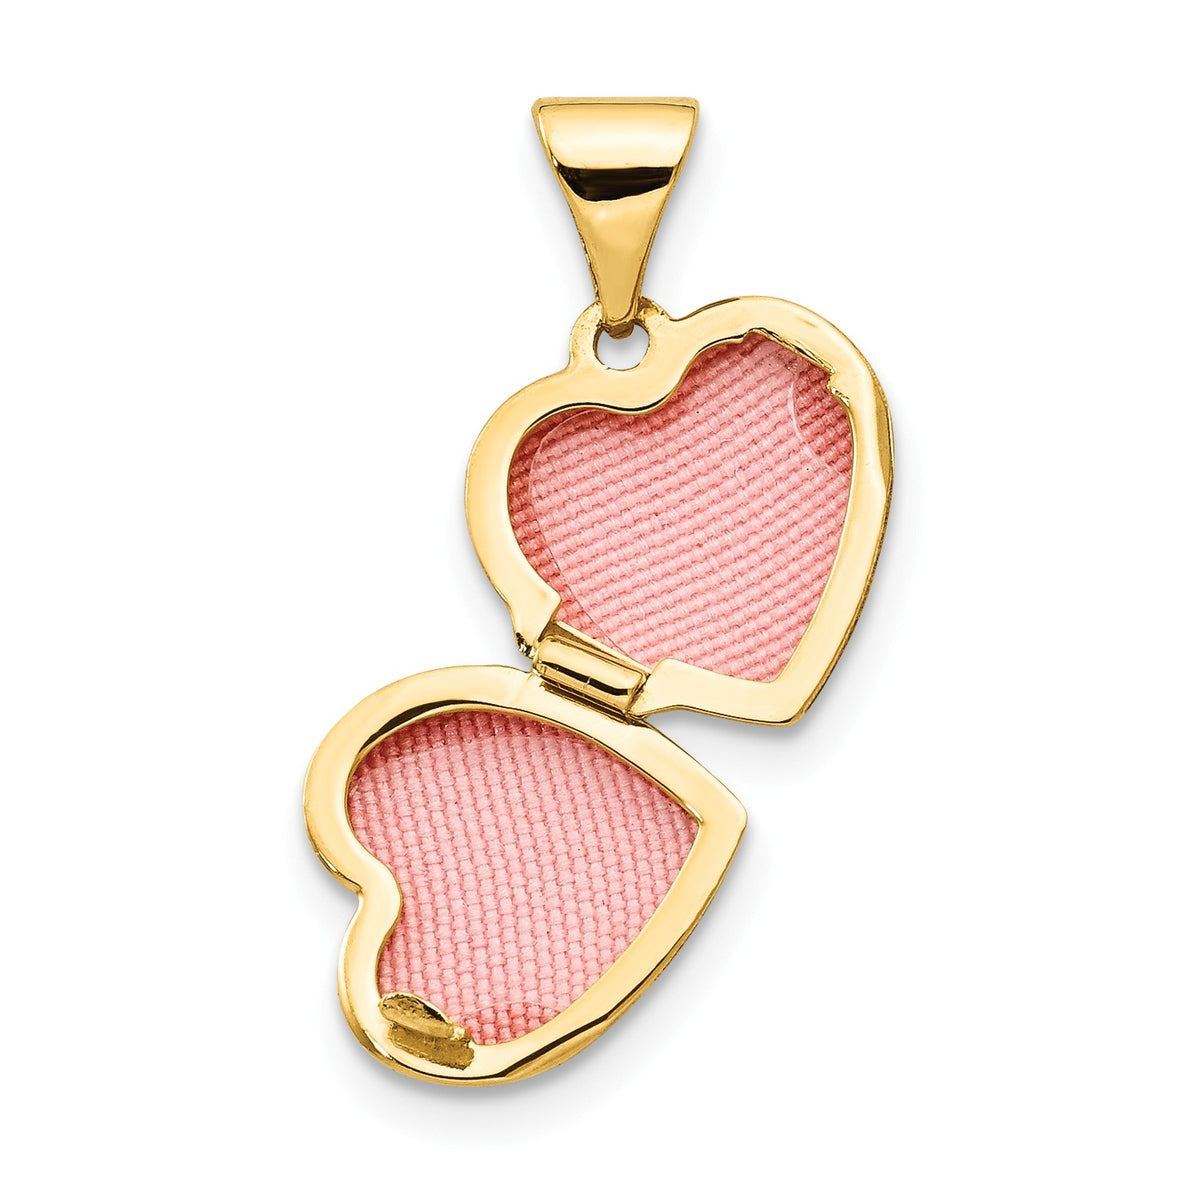 Alternate view of the 14k Yellow Gold 10mm Polished Heart Shaped Locket by The Black Bow Jewelry Co.